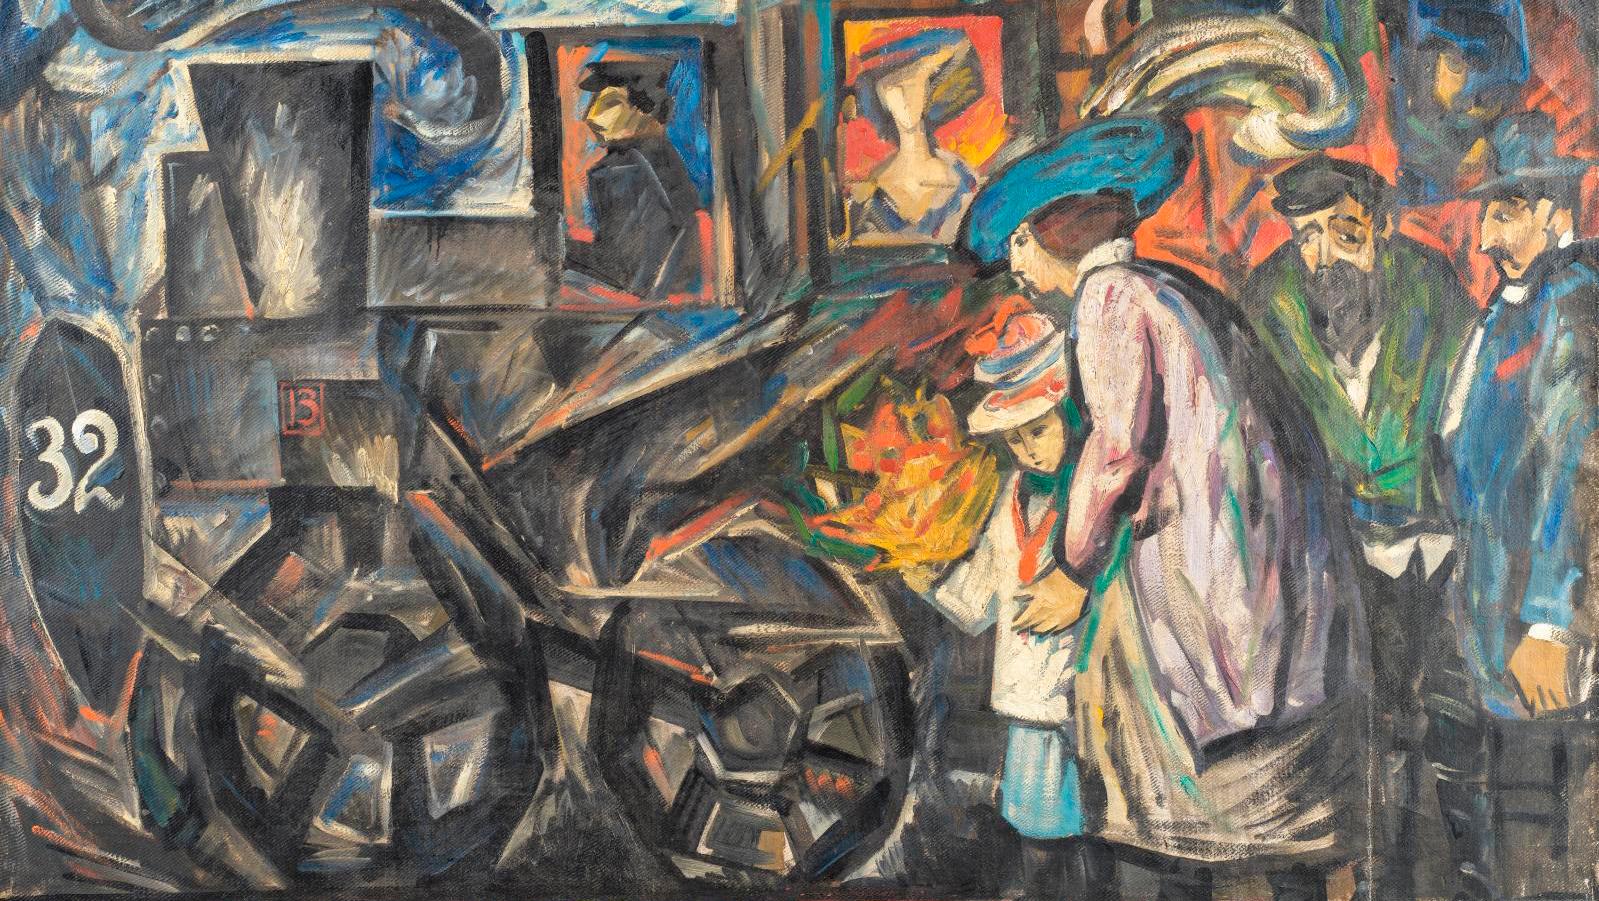 Natalia Goncharova (1881-1962), The Railway Station, Moscow, oil on canvas, c. 1913-1914,... The Train Goes Full Steam Ahead at Auction!